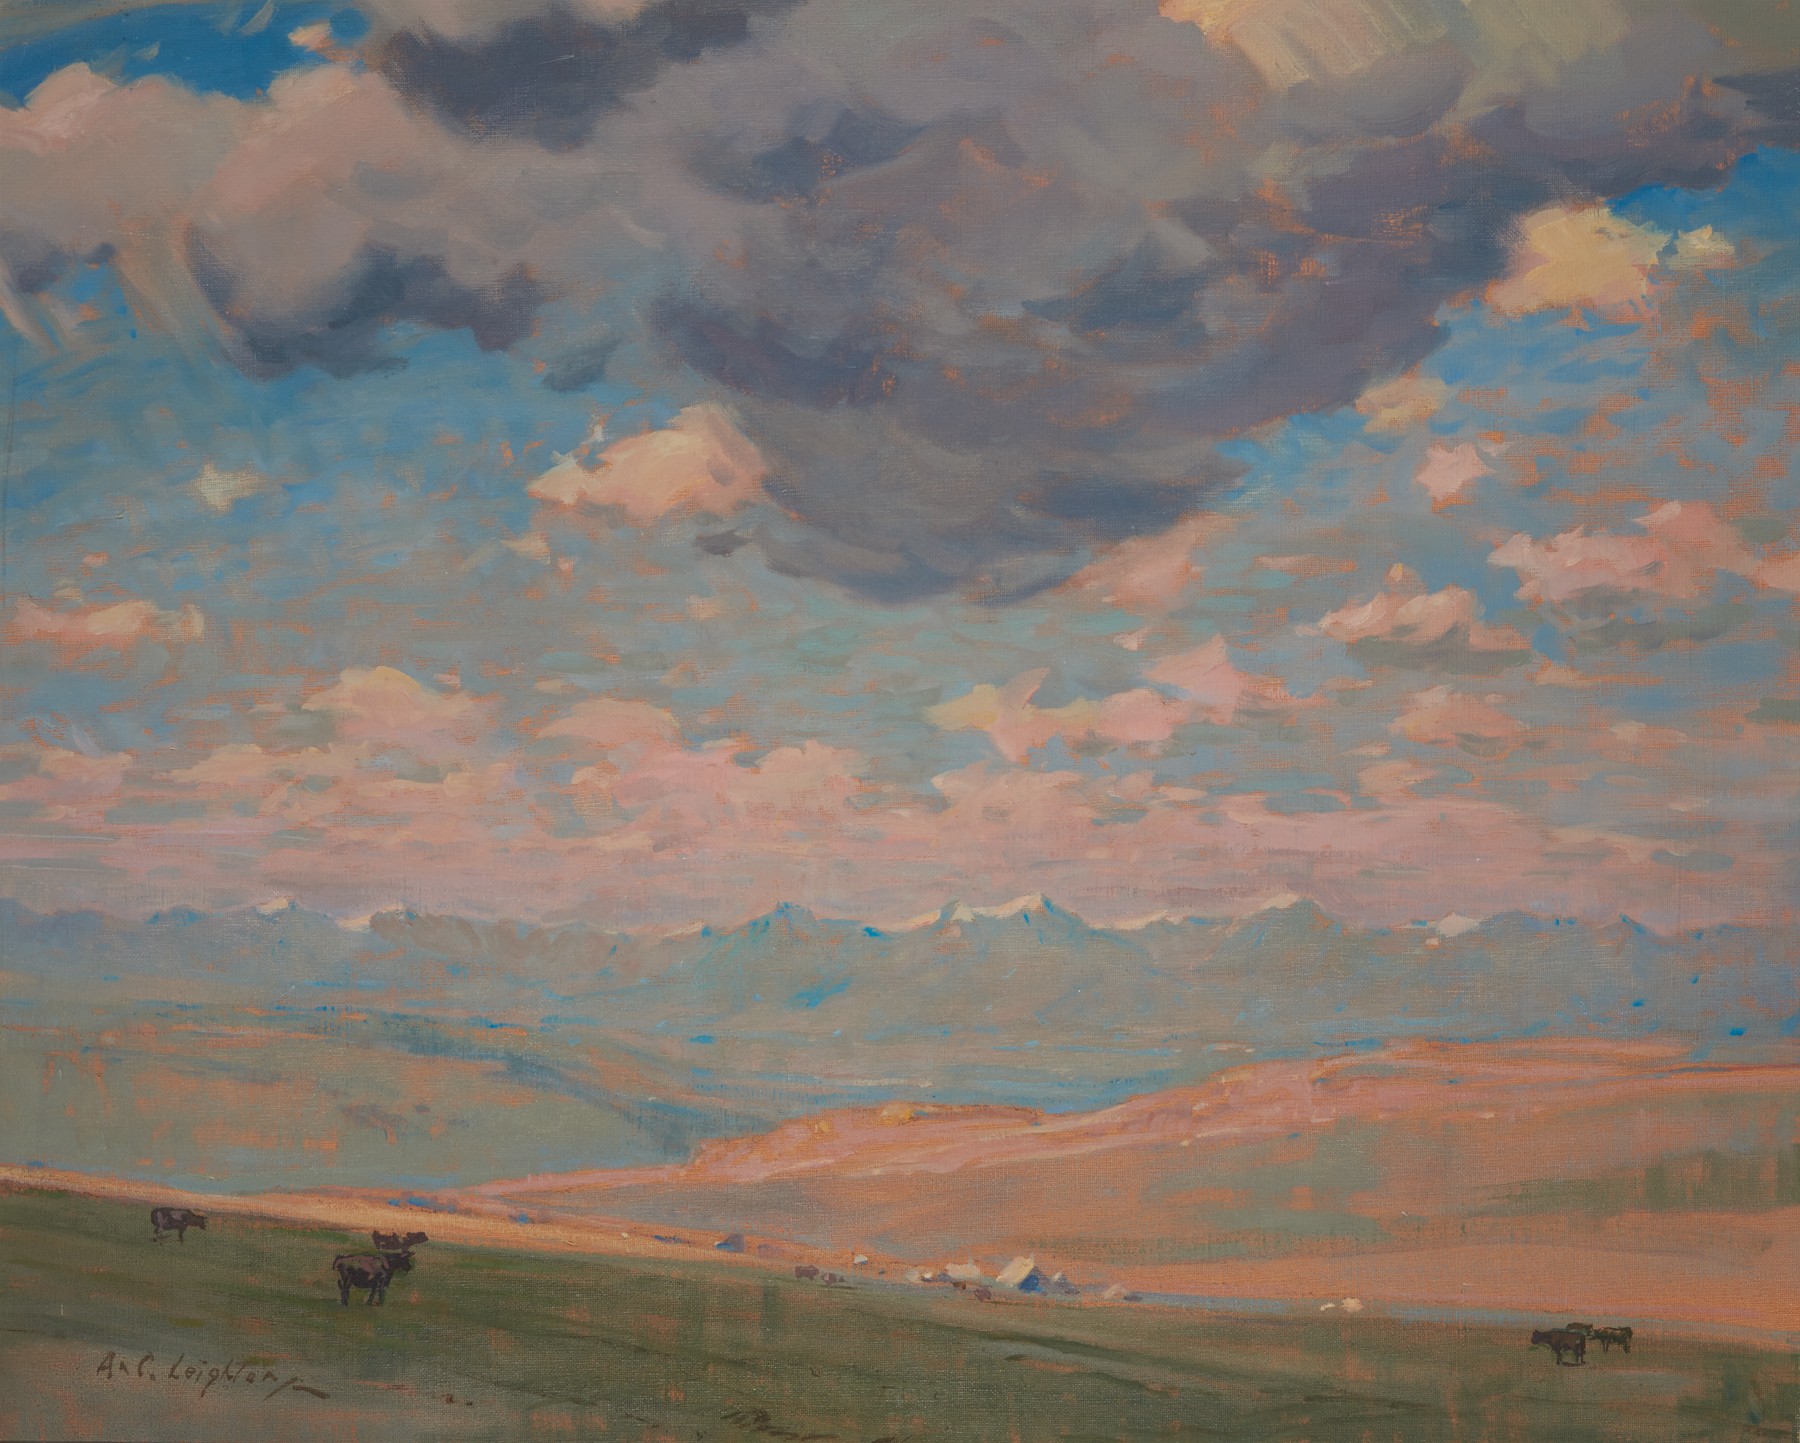 Oil painting of prairie landscape with mountains and a dramatic cloudy but blue sky in distance; small animals and buildings in mid ground.